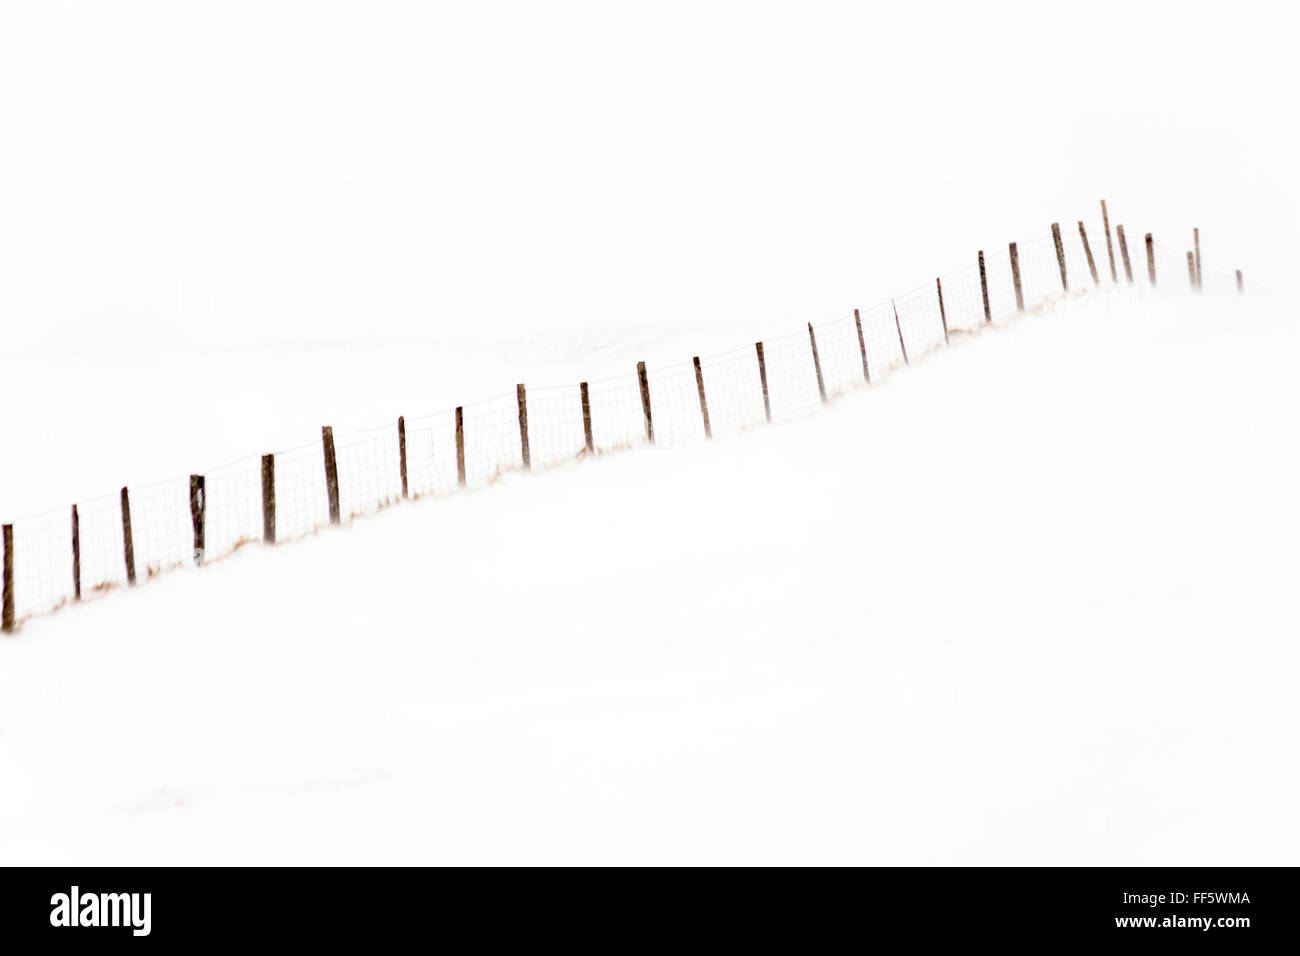 Minimalist image of fence going up hillside in the snow at Iceland in January - minimalist landscape scenery scenic - snow minimalism Stock Photo